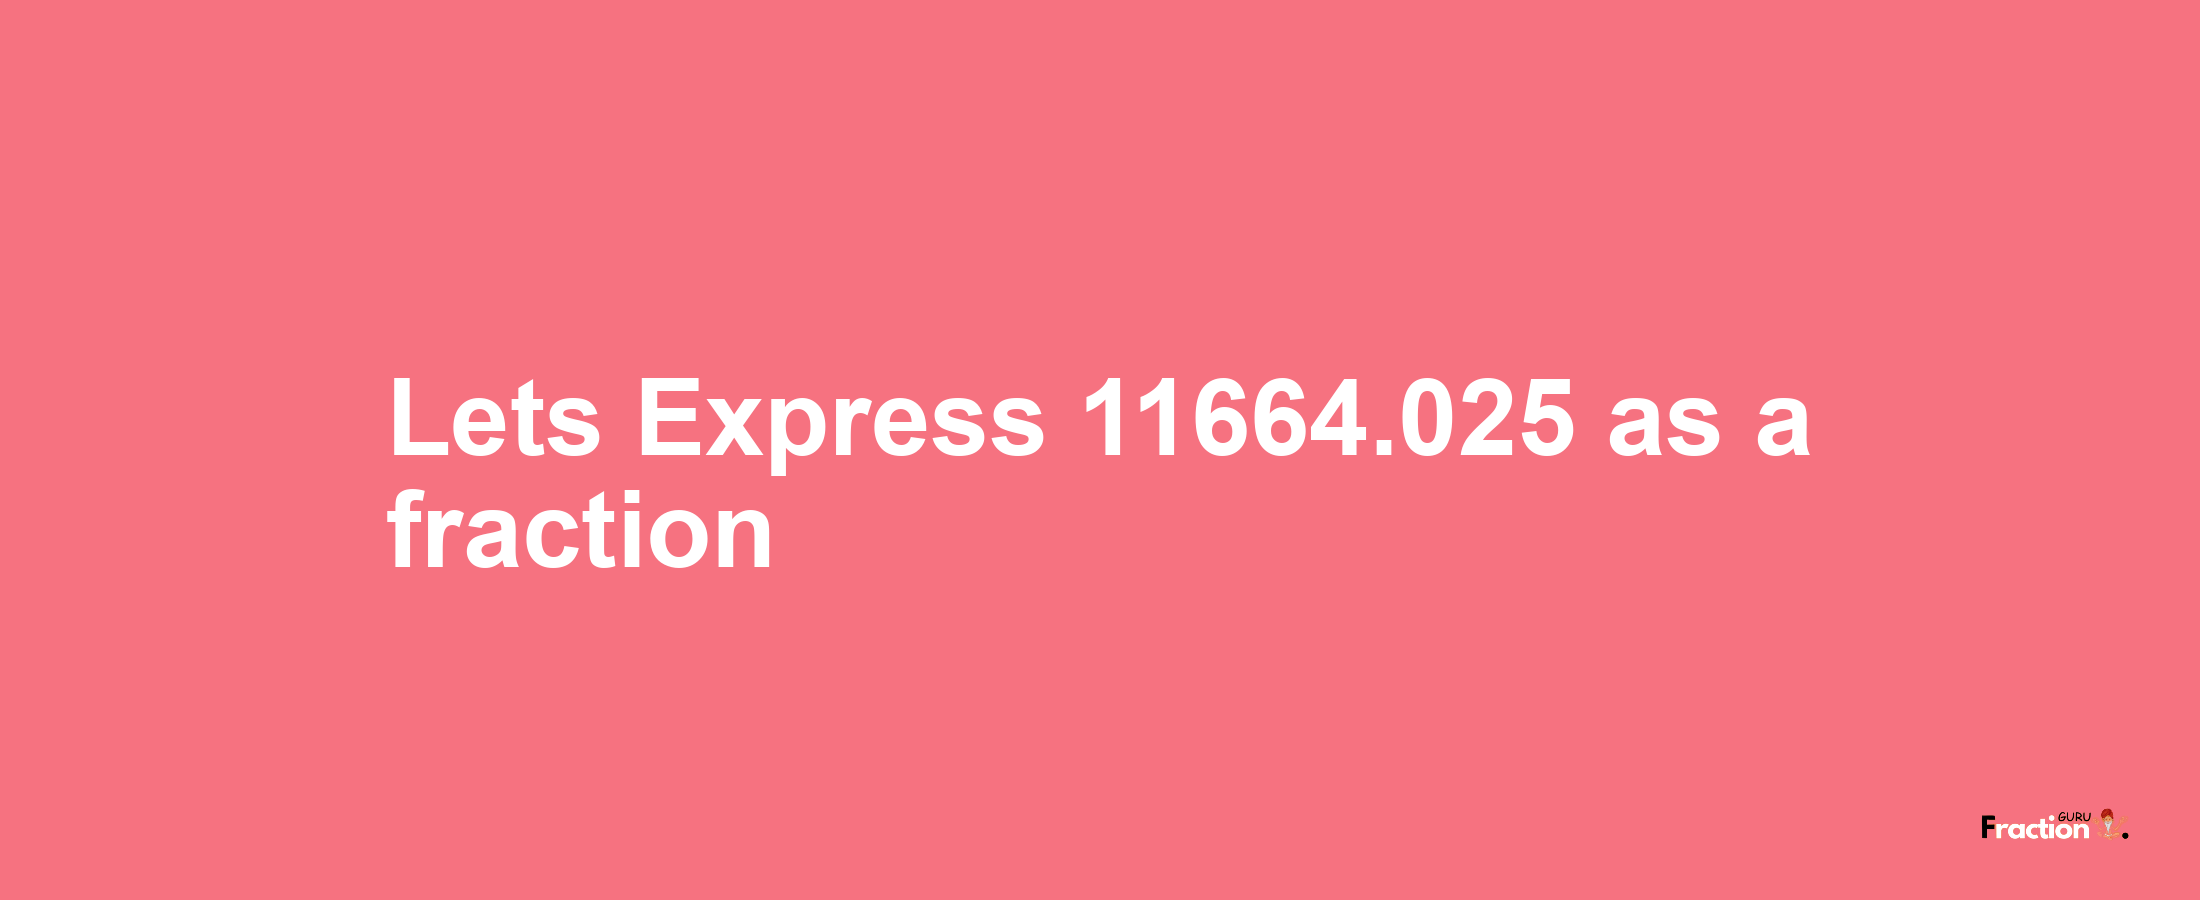 Lets Express 11664.025 as afraction